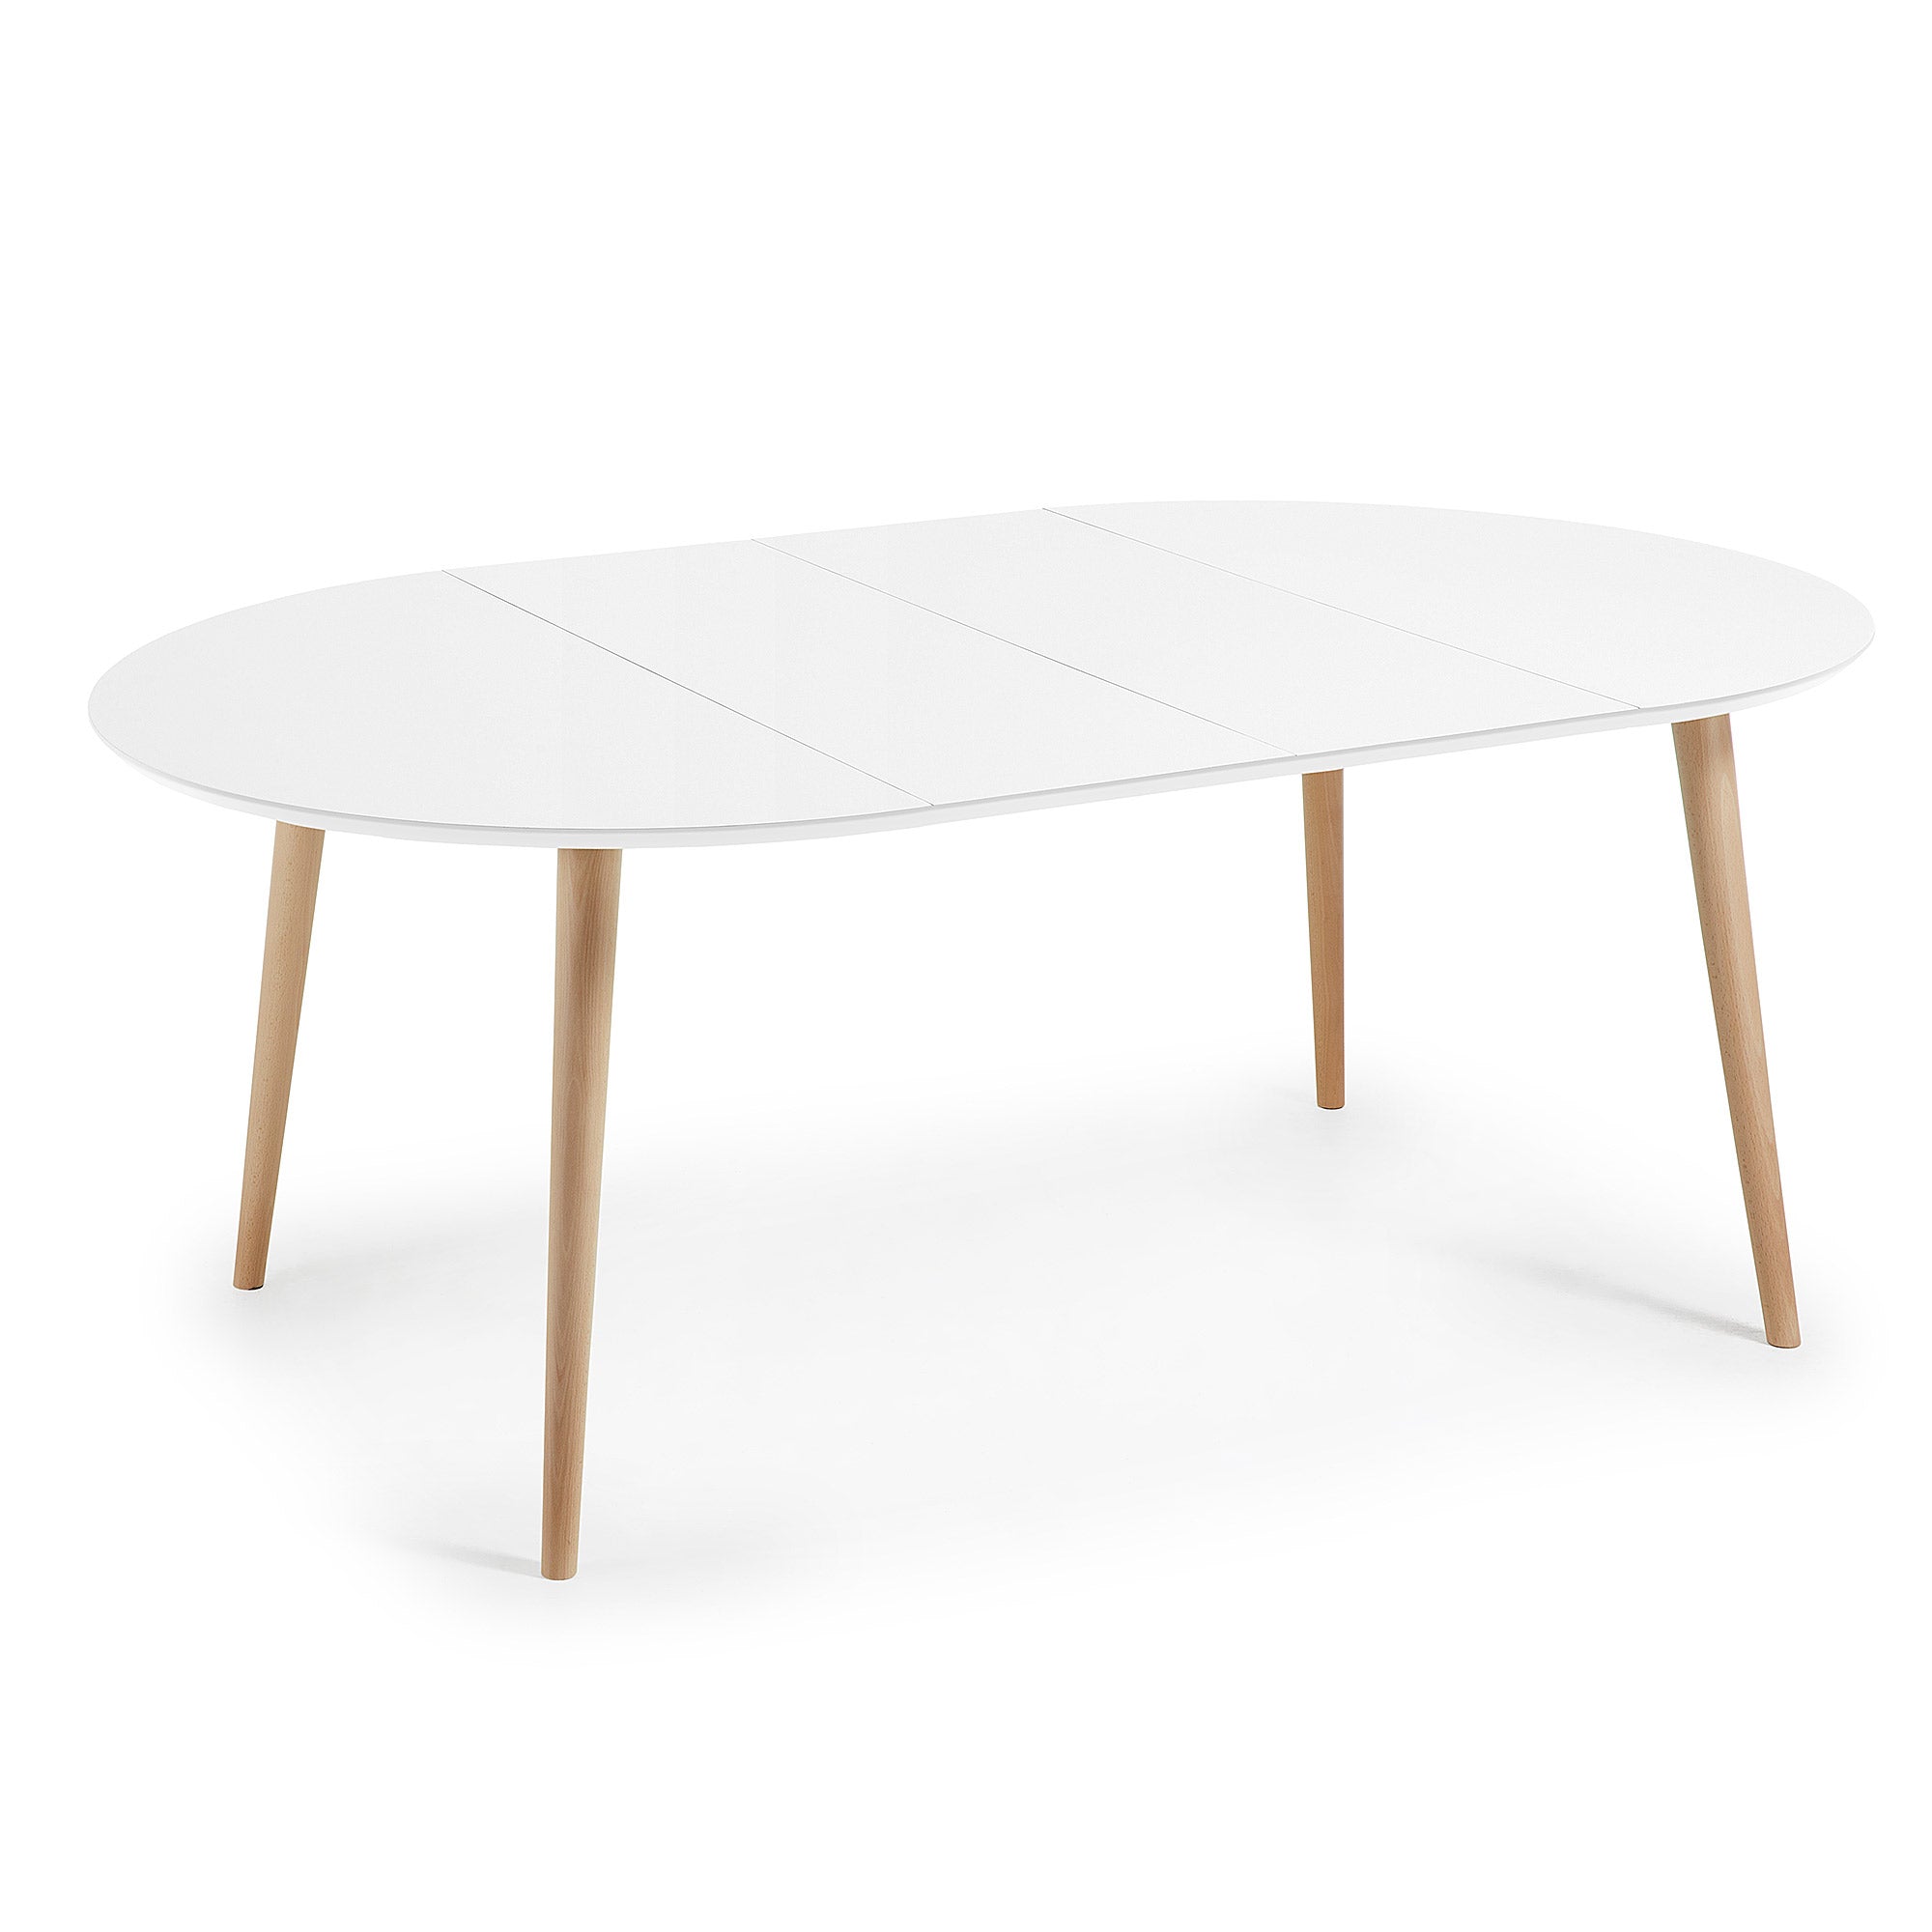 Oqui round extendable MDF table with white lacquer and solid beech legs 120(200)x120 cm